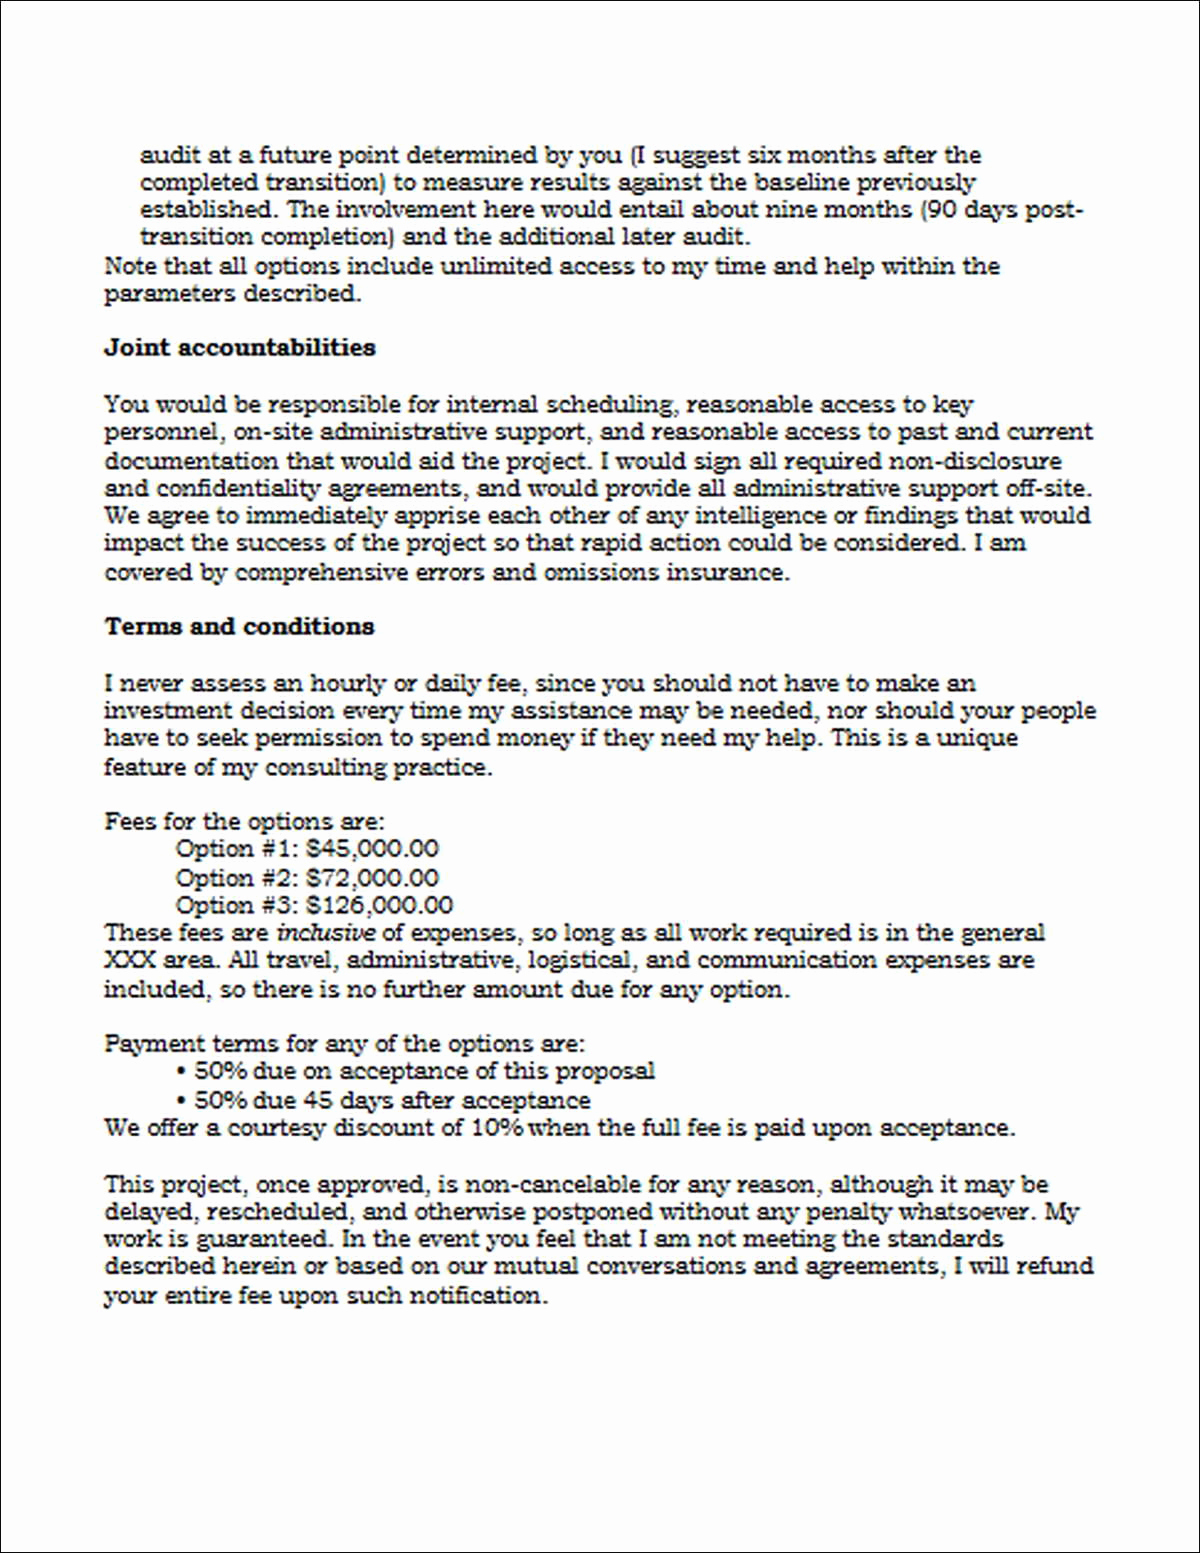 Consulting Engagement Letter Template - 18 Sample Consulting Engagement Letters